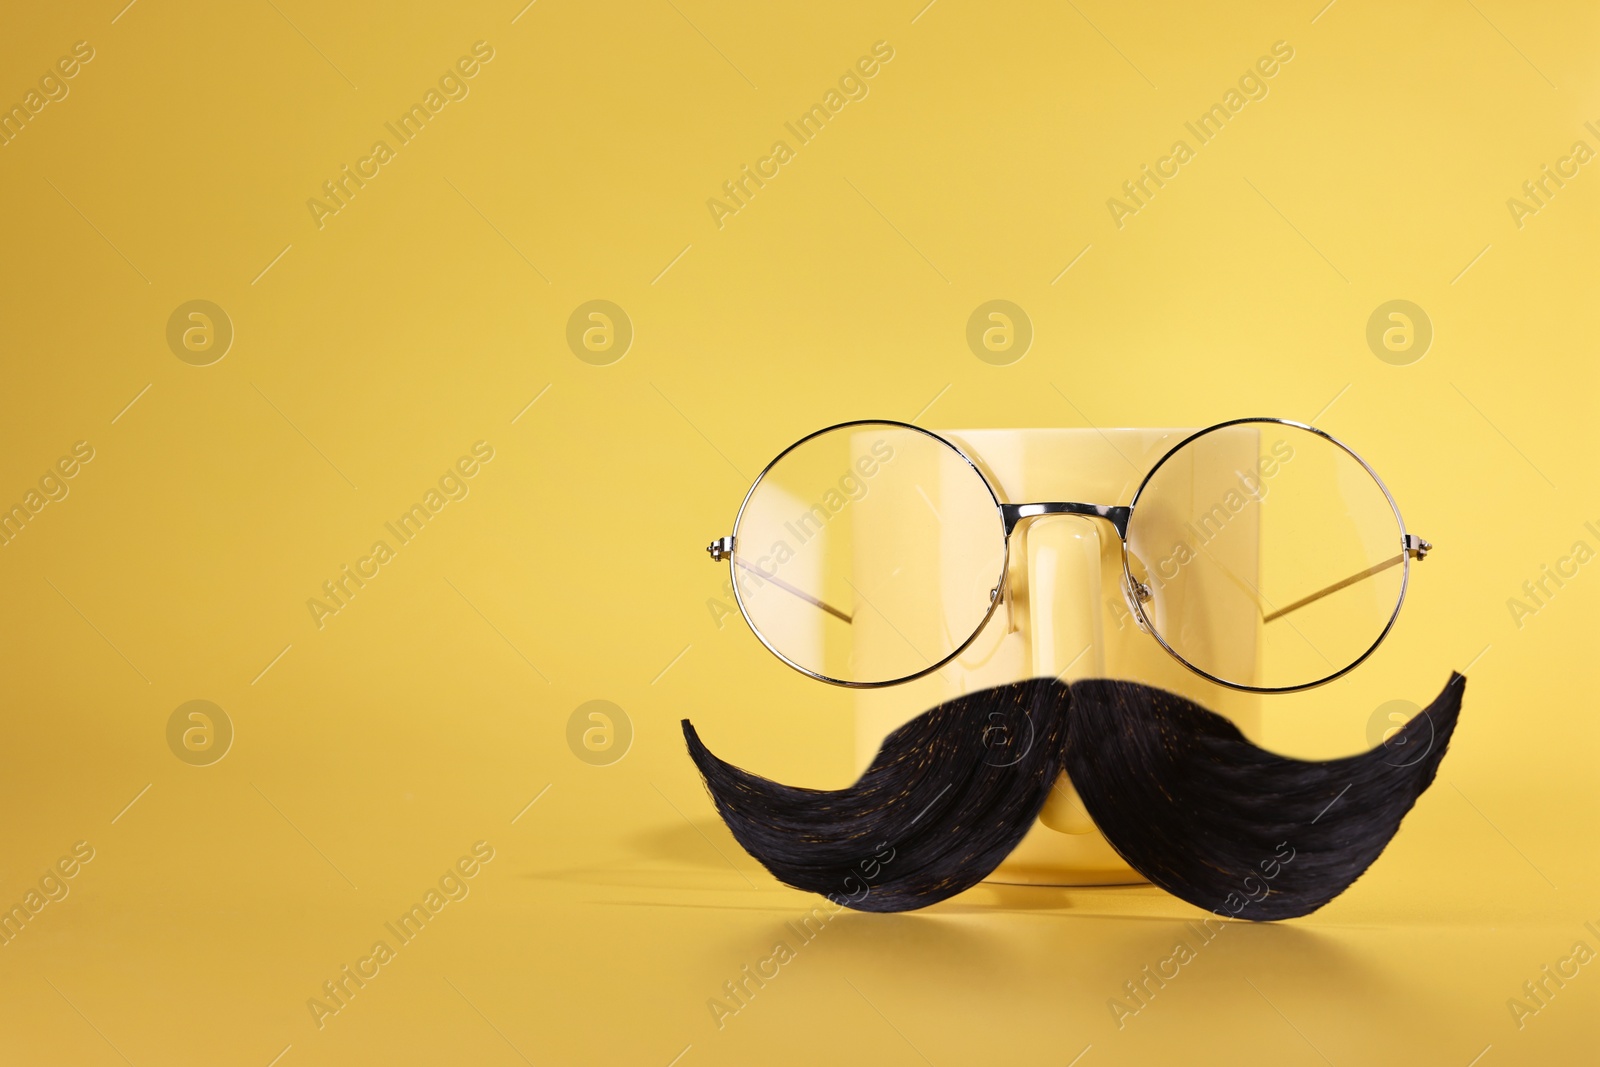 Photo of Man's face made of artificial mustache, glasses and cup on yellow background. Space for text